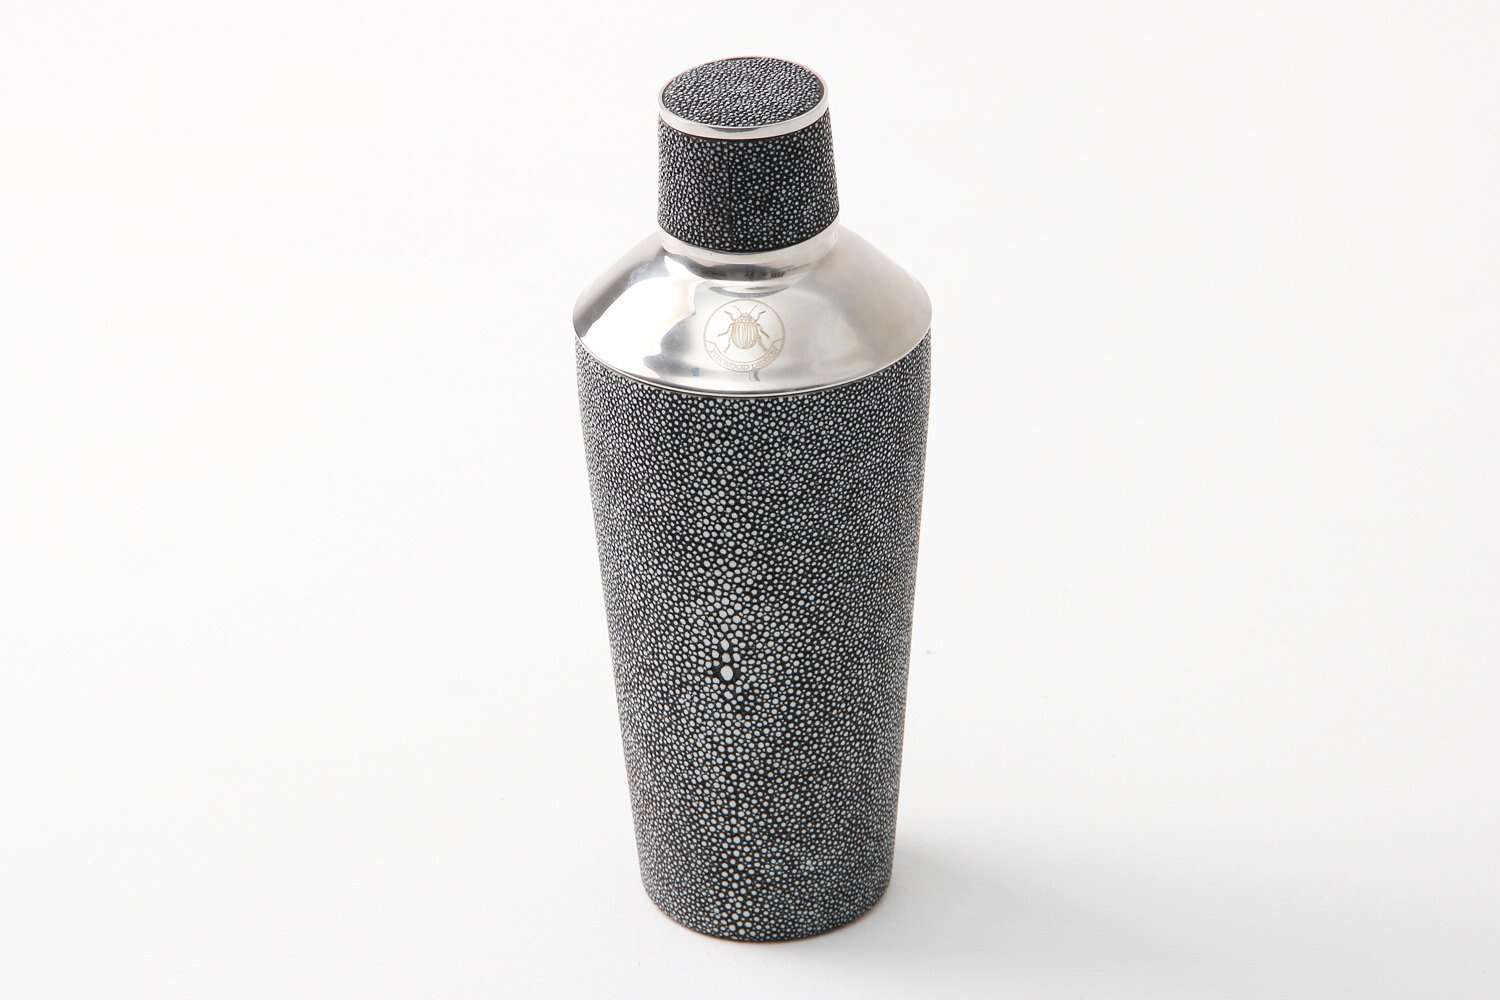 Cocktail shaker charcoal shagreen cocktail shaker